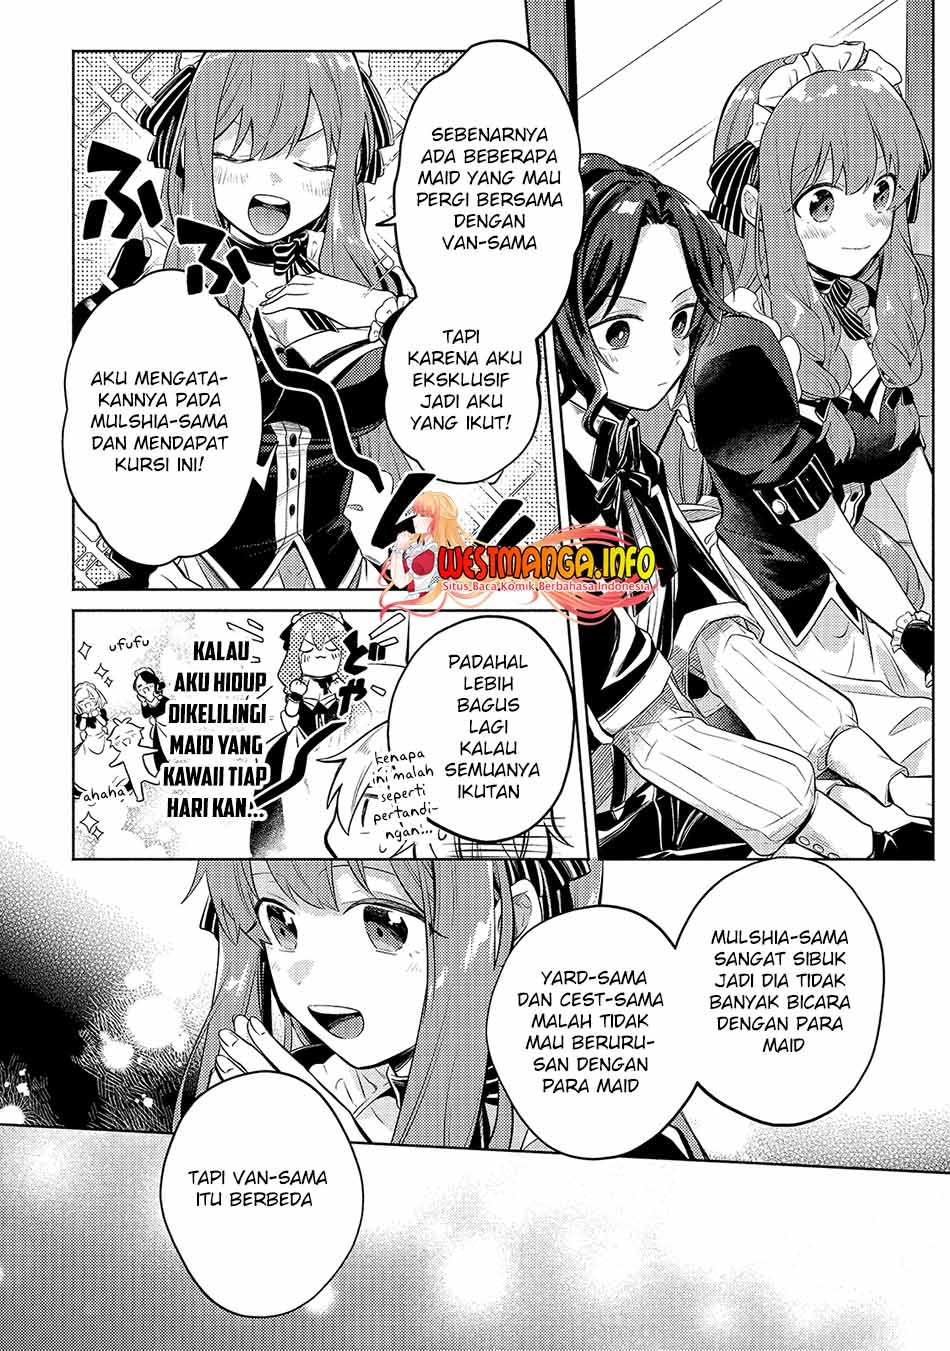 Fun Territory Defense Of The Easy-going Lord ~the Nameless Village Is Made Into The Strongest Fortified City By Production Magic~ Chapter 04